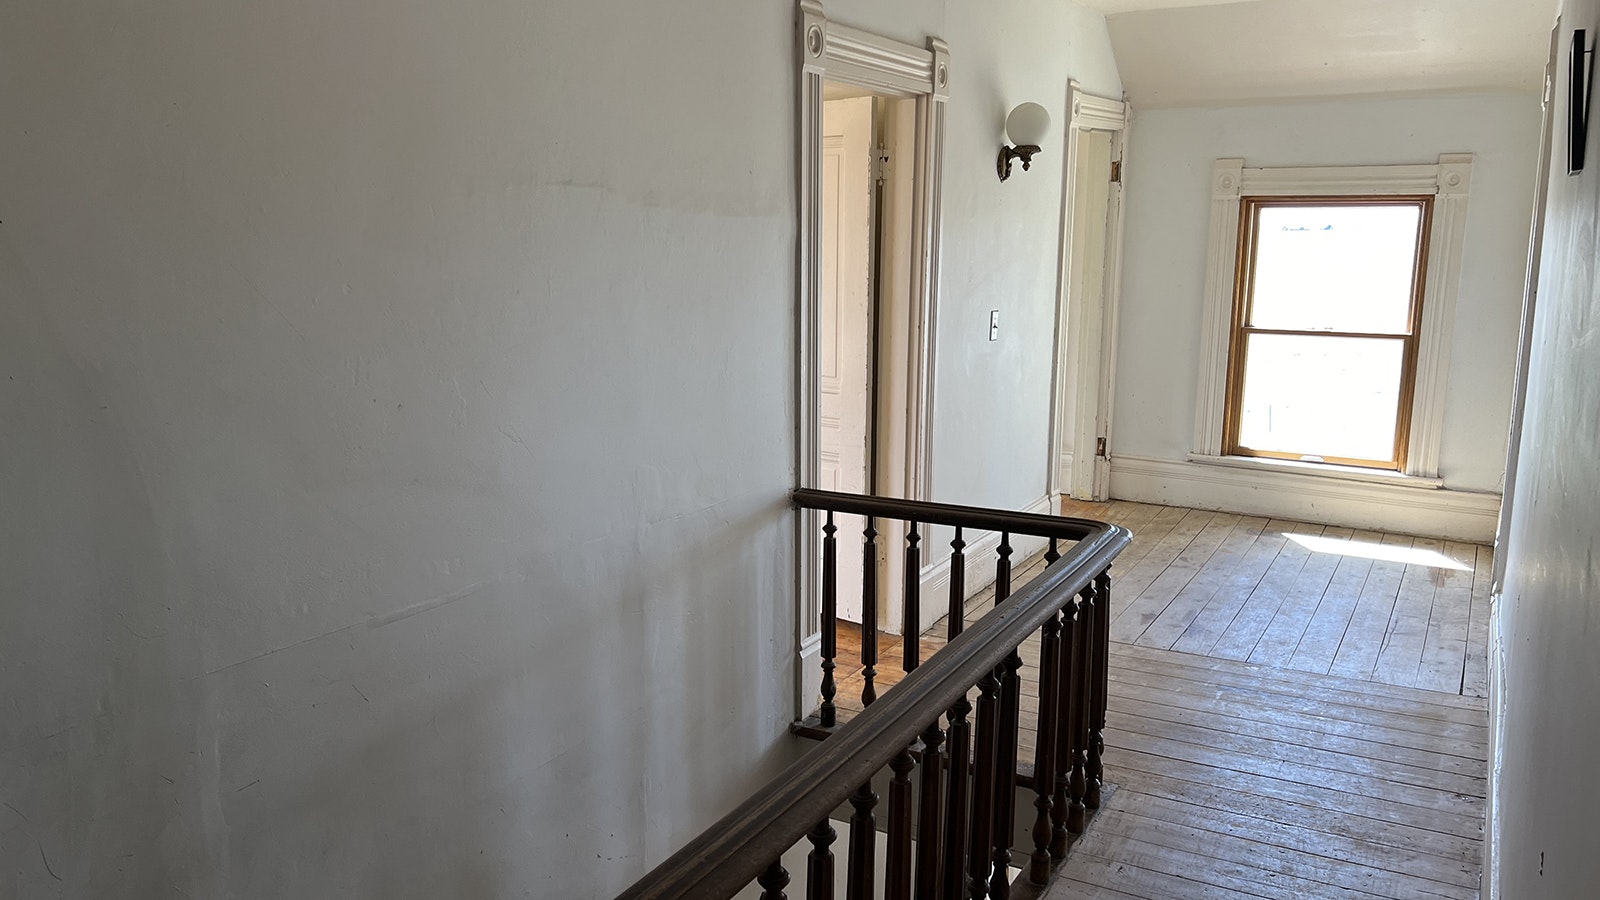 As many as nine children of original owner W.H. Holliday scampered around the hallways of Laramie’s Holliday House mansion, which was built in 1878.